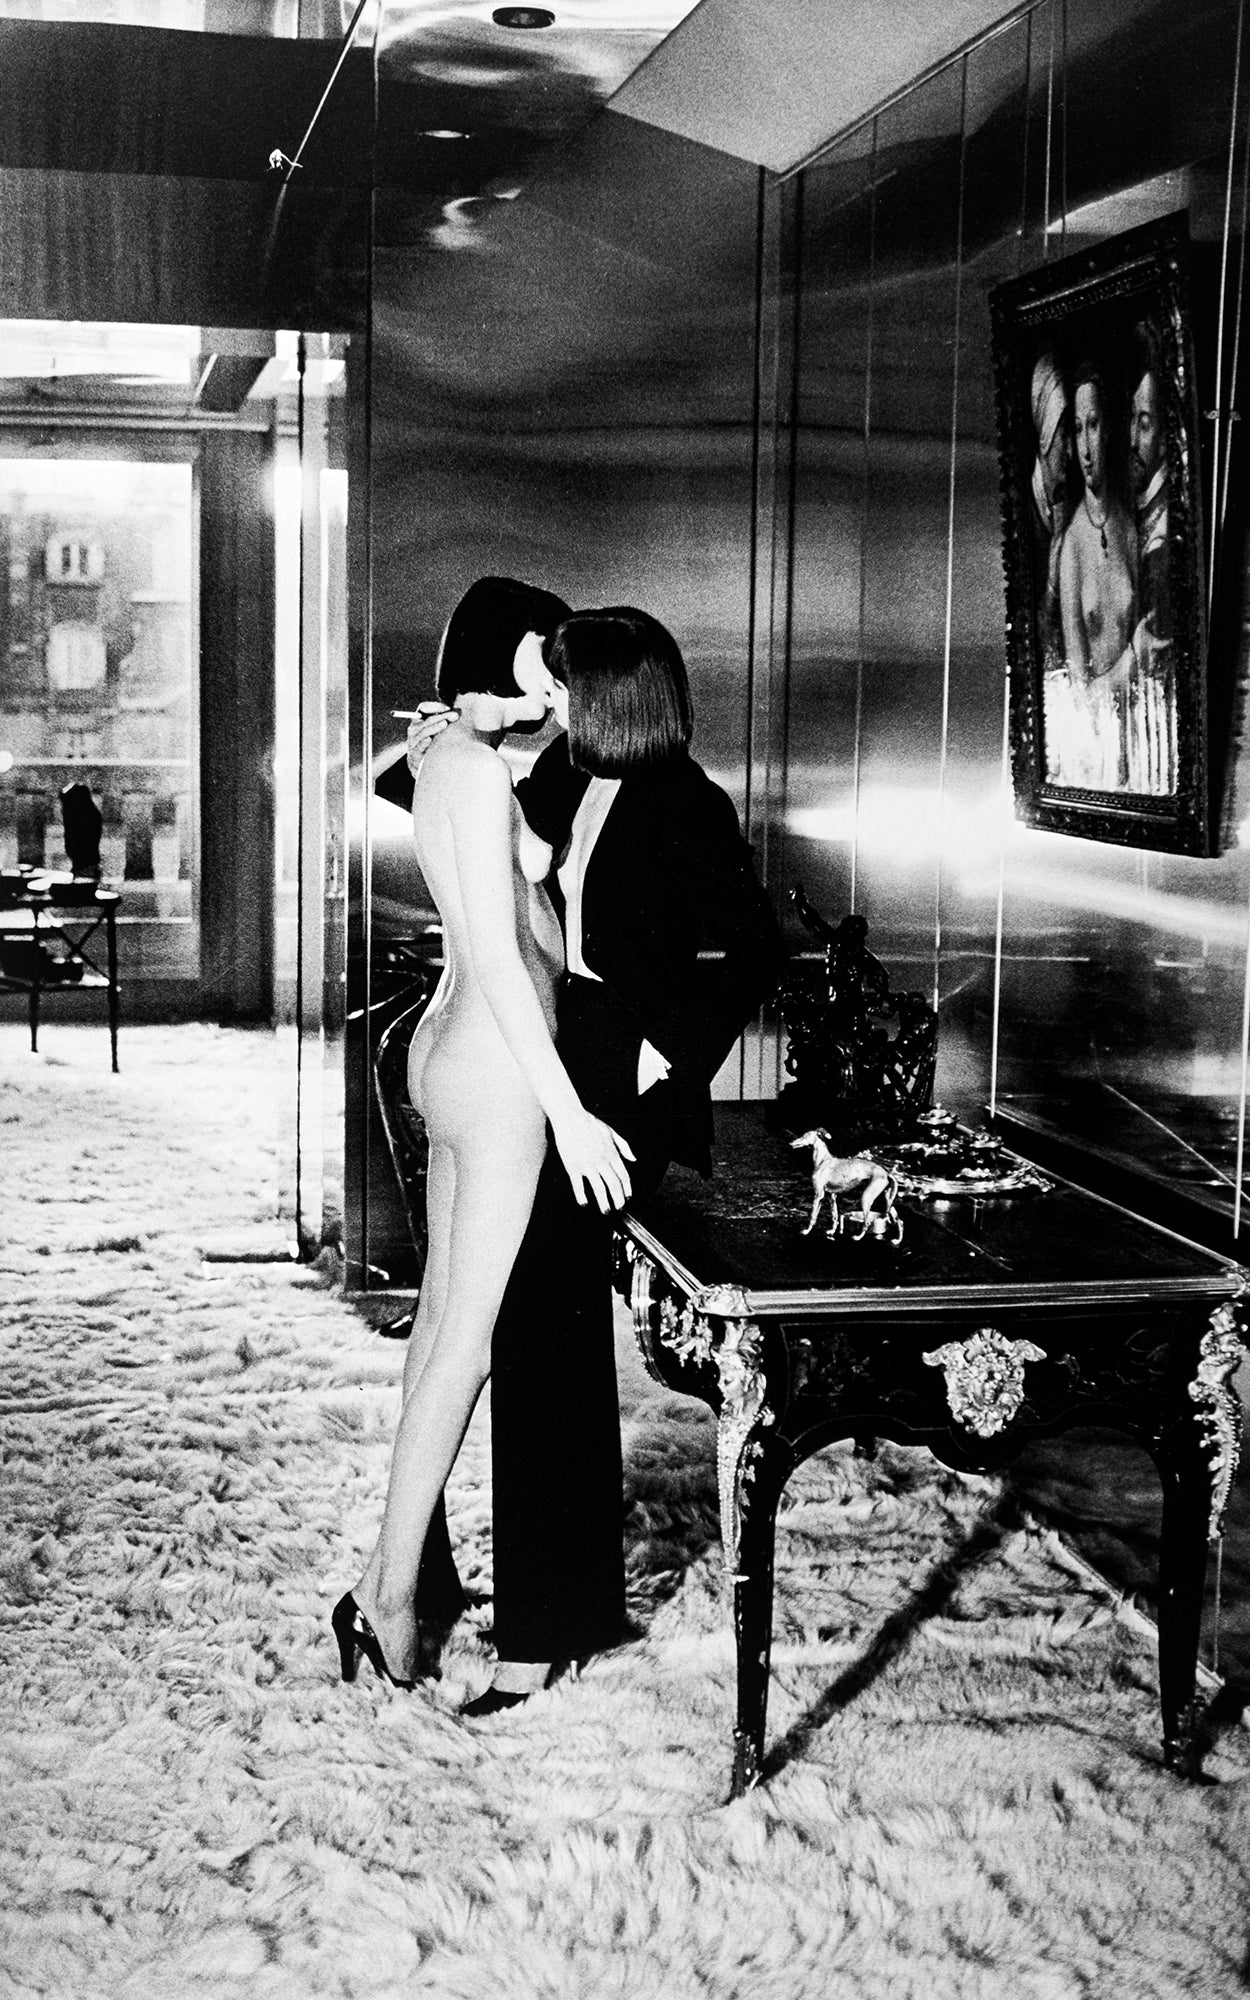 Helmut Newton — Special Collection 24 Photo Lithos